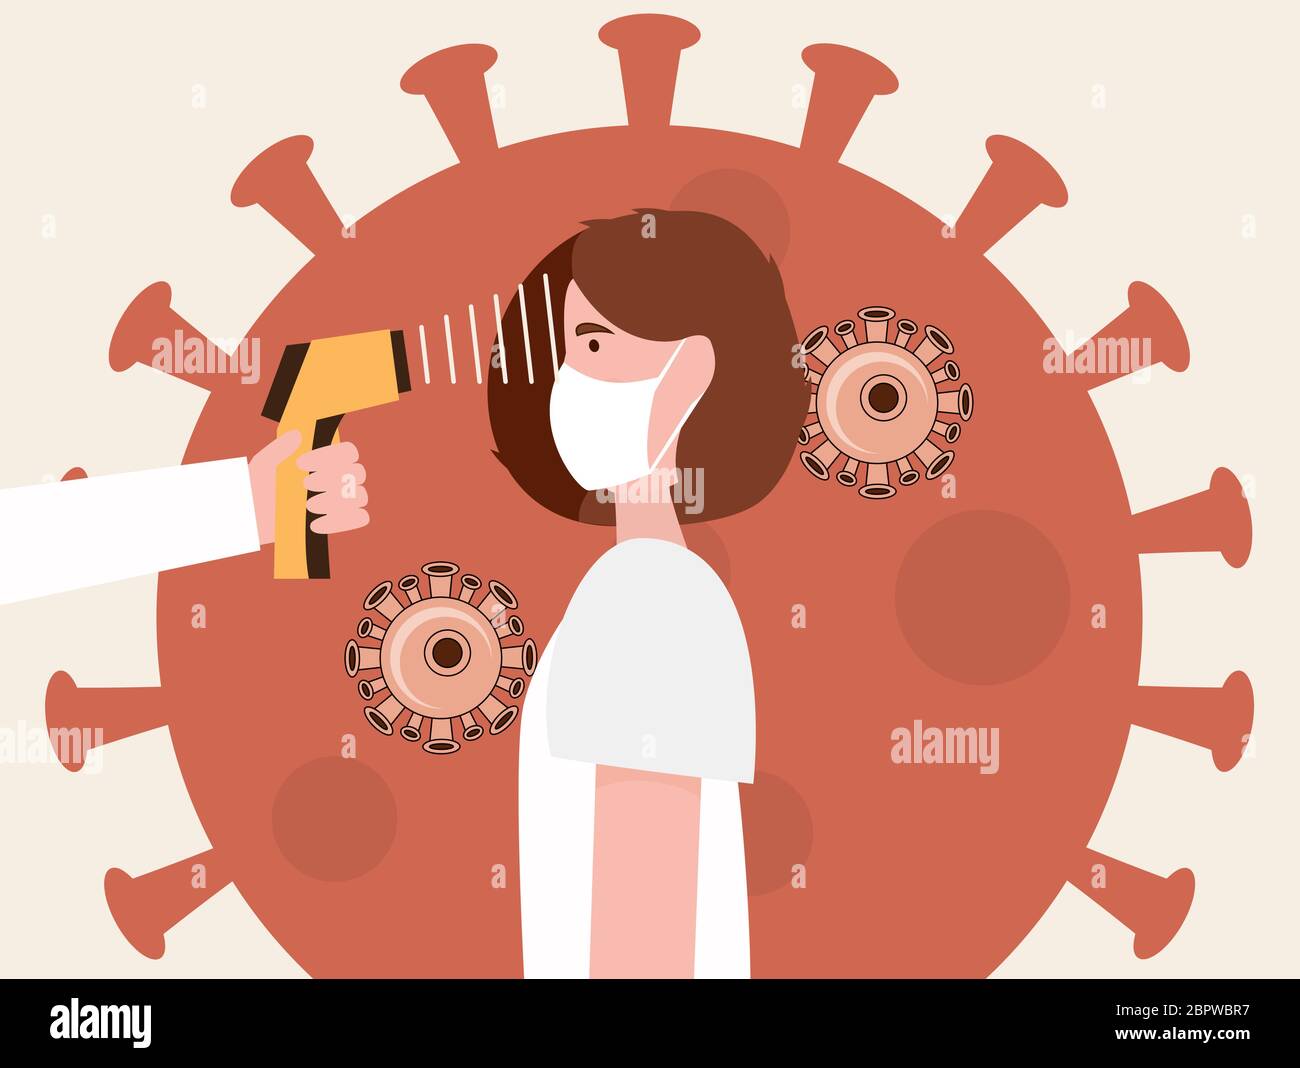 Doctor Holding Infrared Thermometer to Measure Woman's Body Temperature. COVID-19 Coronavirus Flu Patient with High Temperature. Vector Illustration. Stock Vector